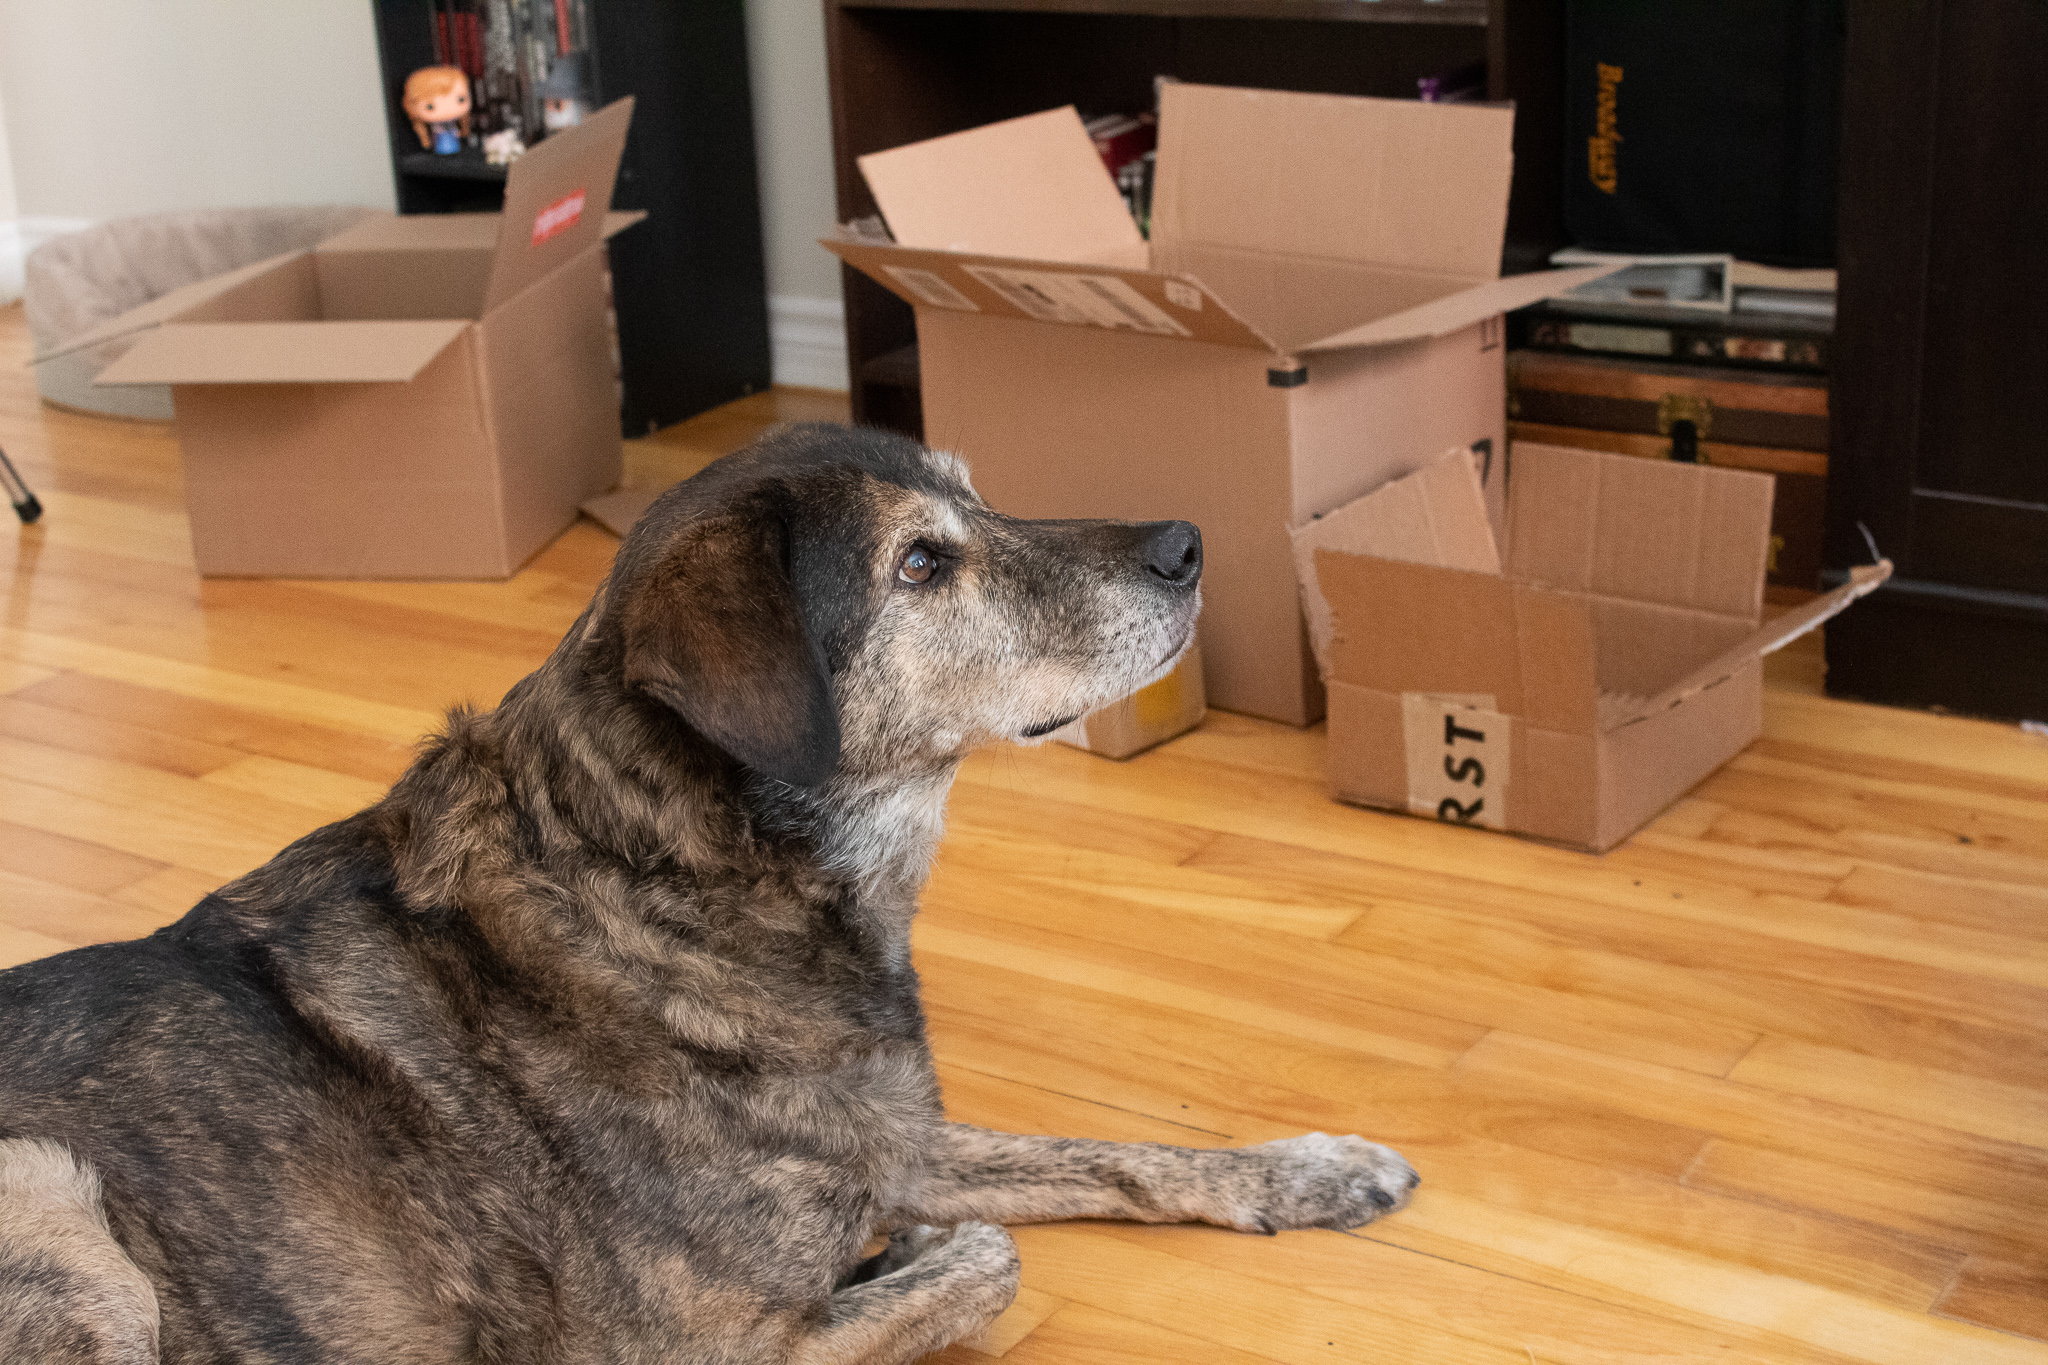 Brown dog sitting on a hardwood floor in front of cardboard boxes